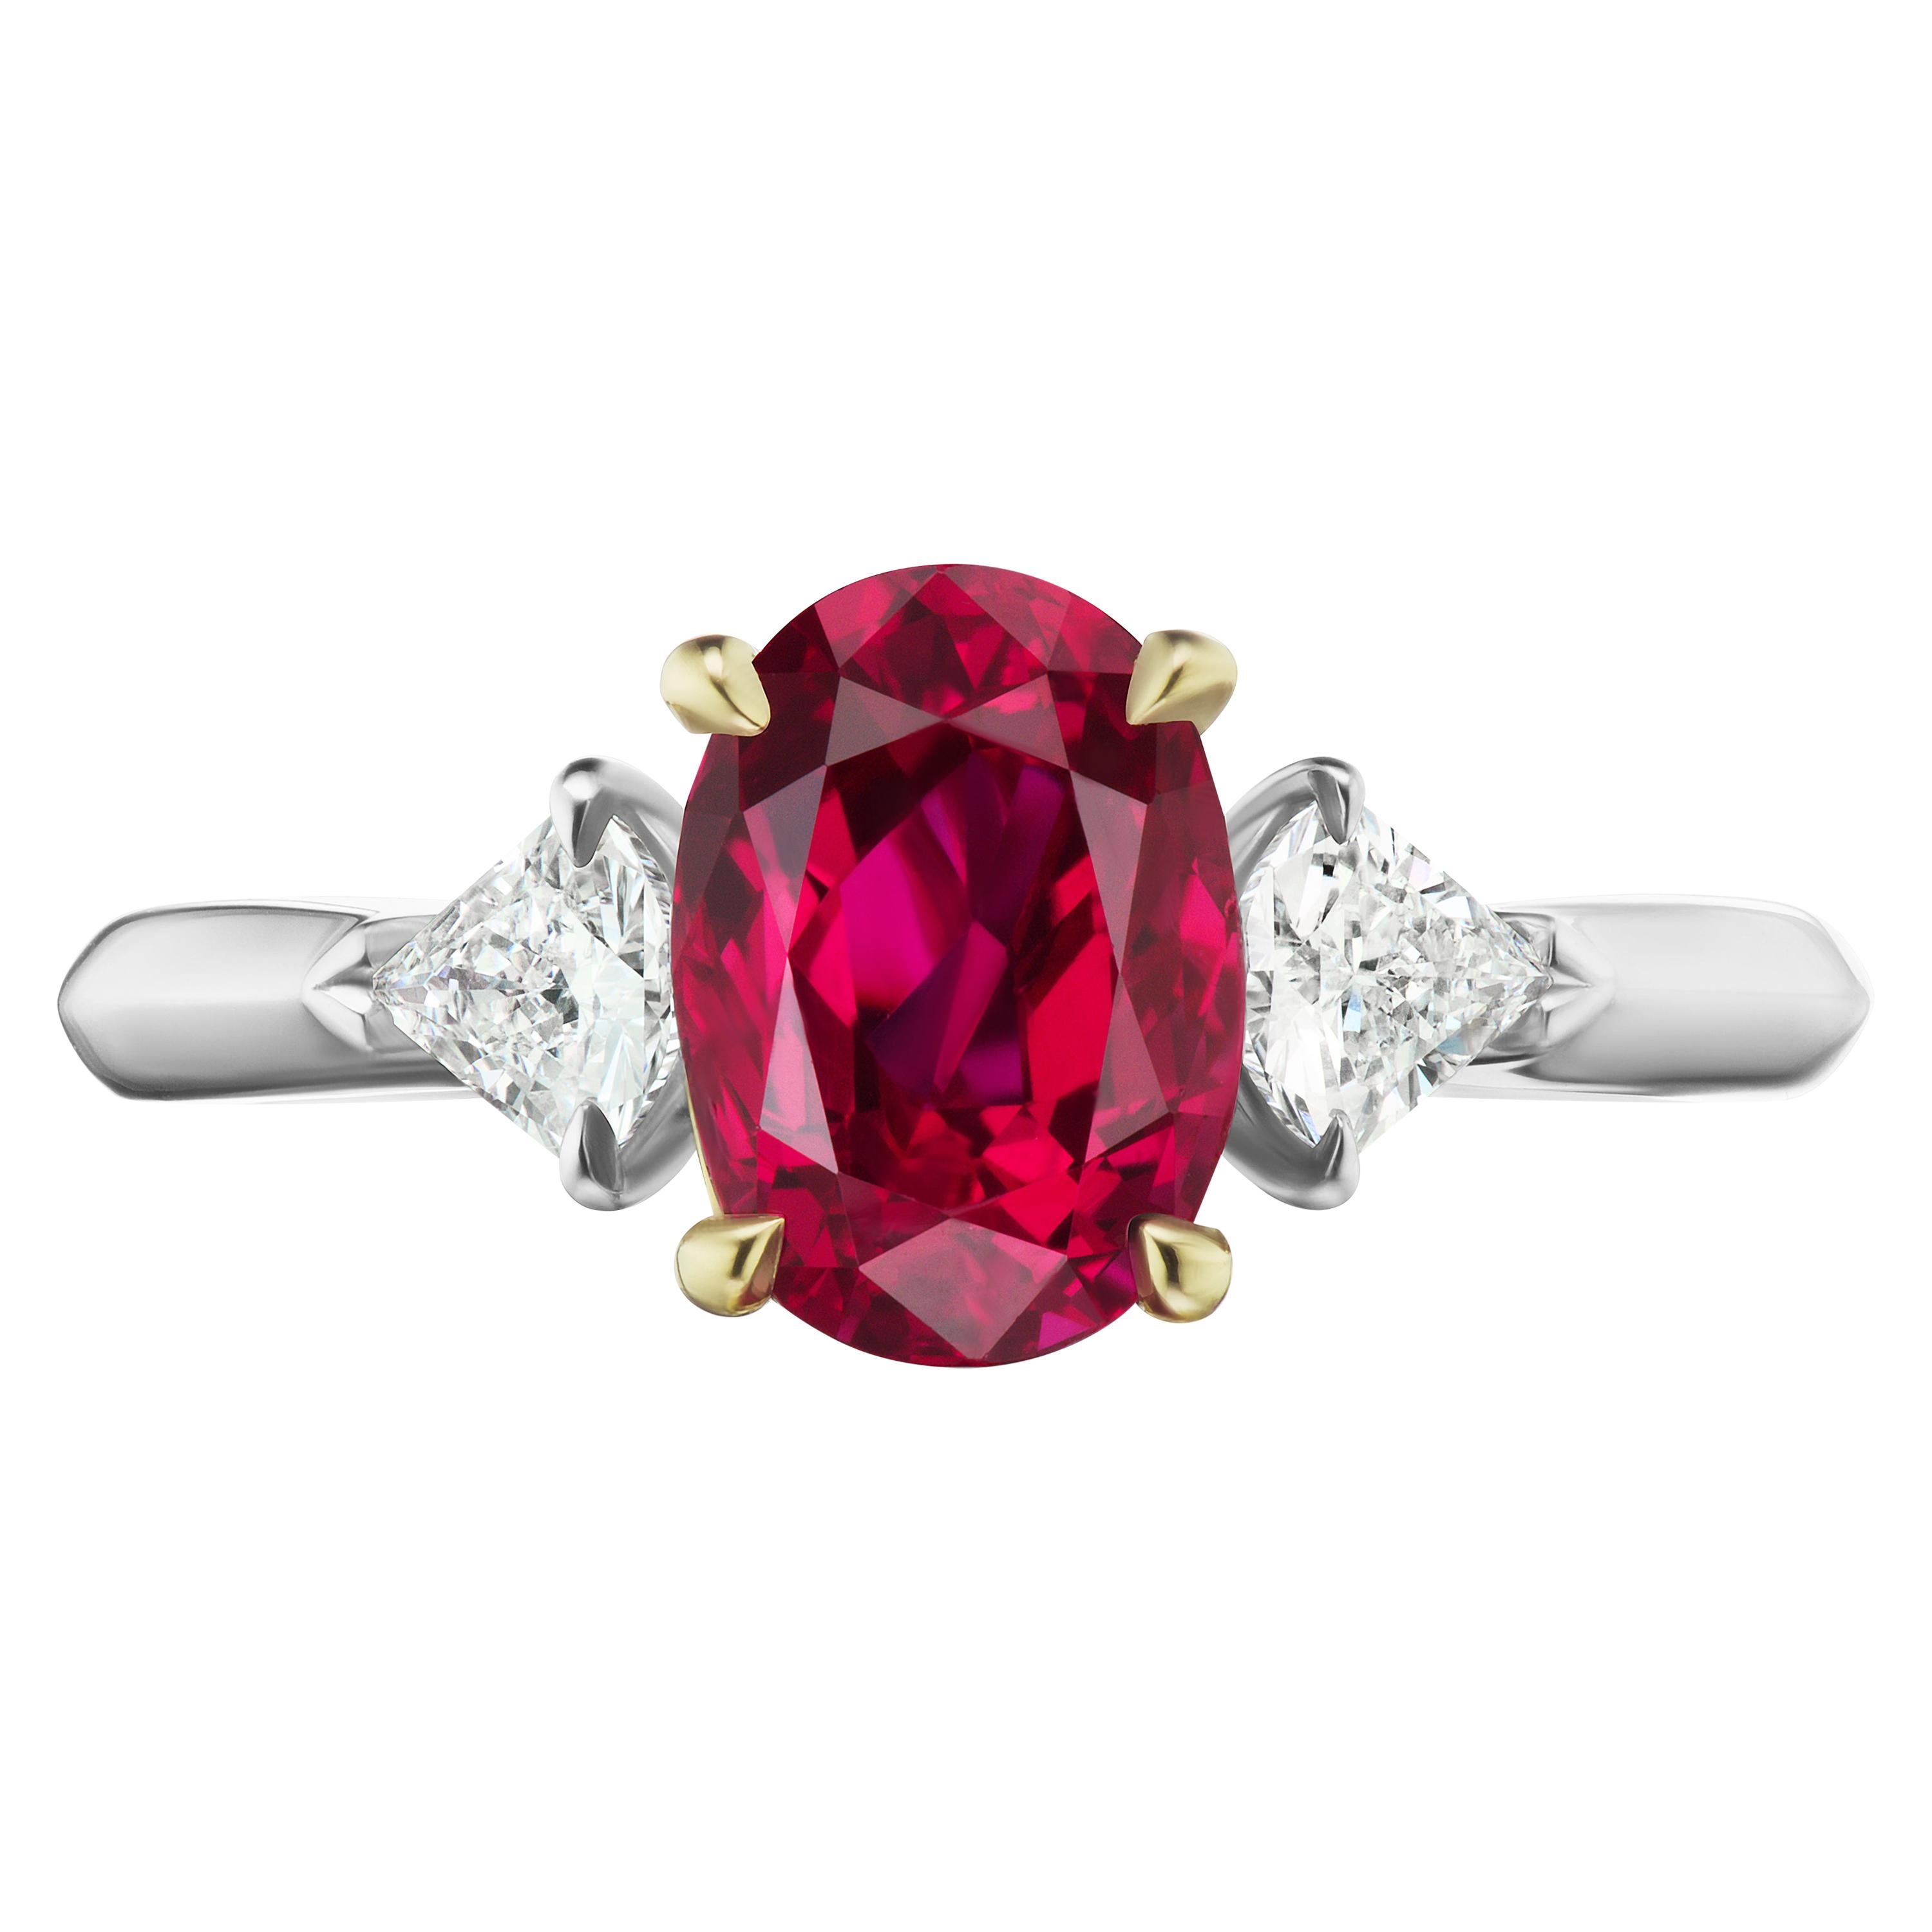 2.49 Carat Conflict Free Oval Ruby GIA Certified from Thailand Set with Kites For Sale